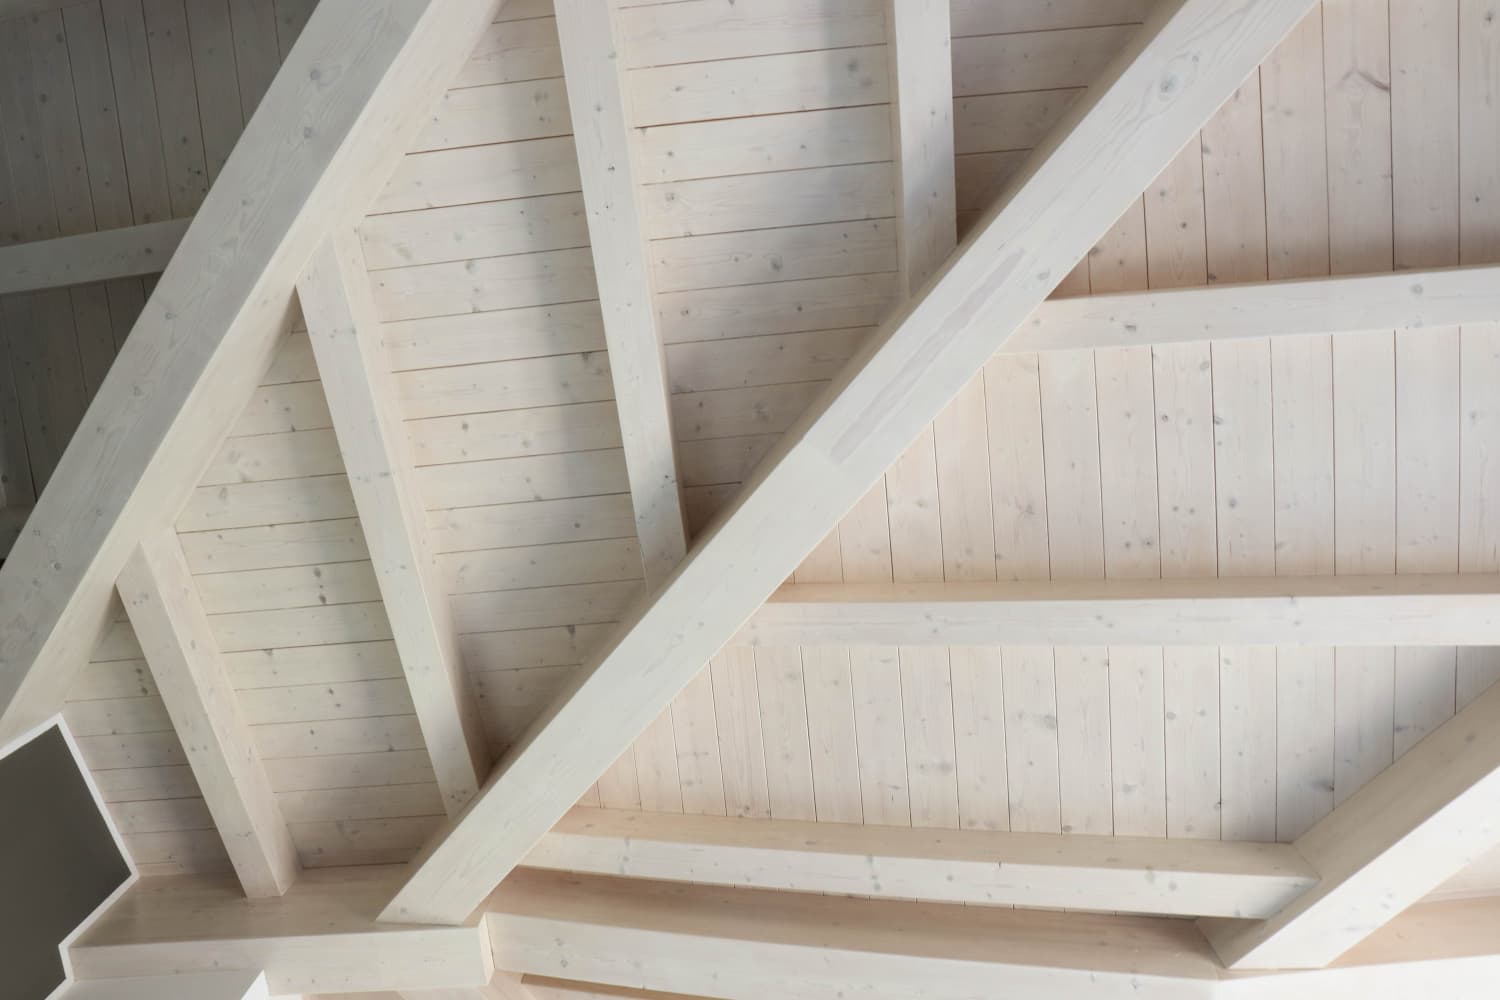 Why You Should Be Concerned If a Home’s Attic Has Been Painted White